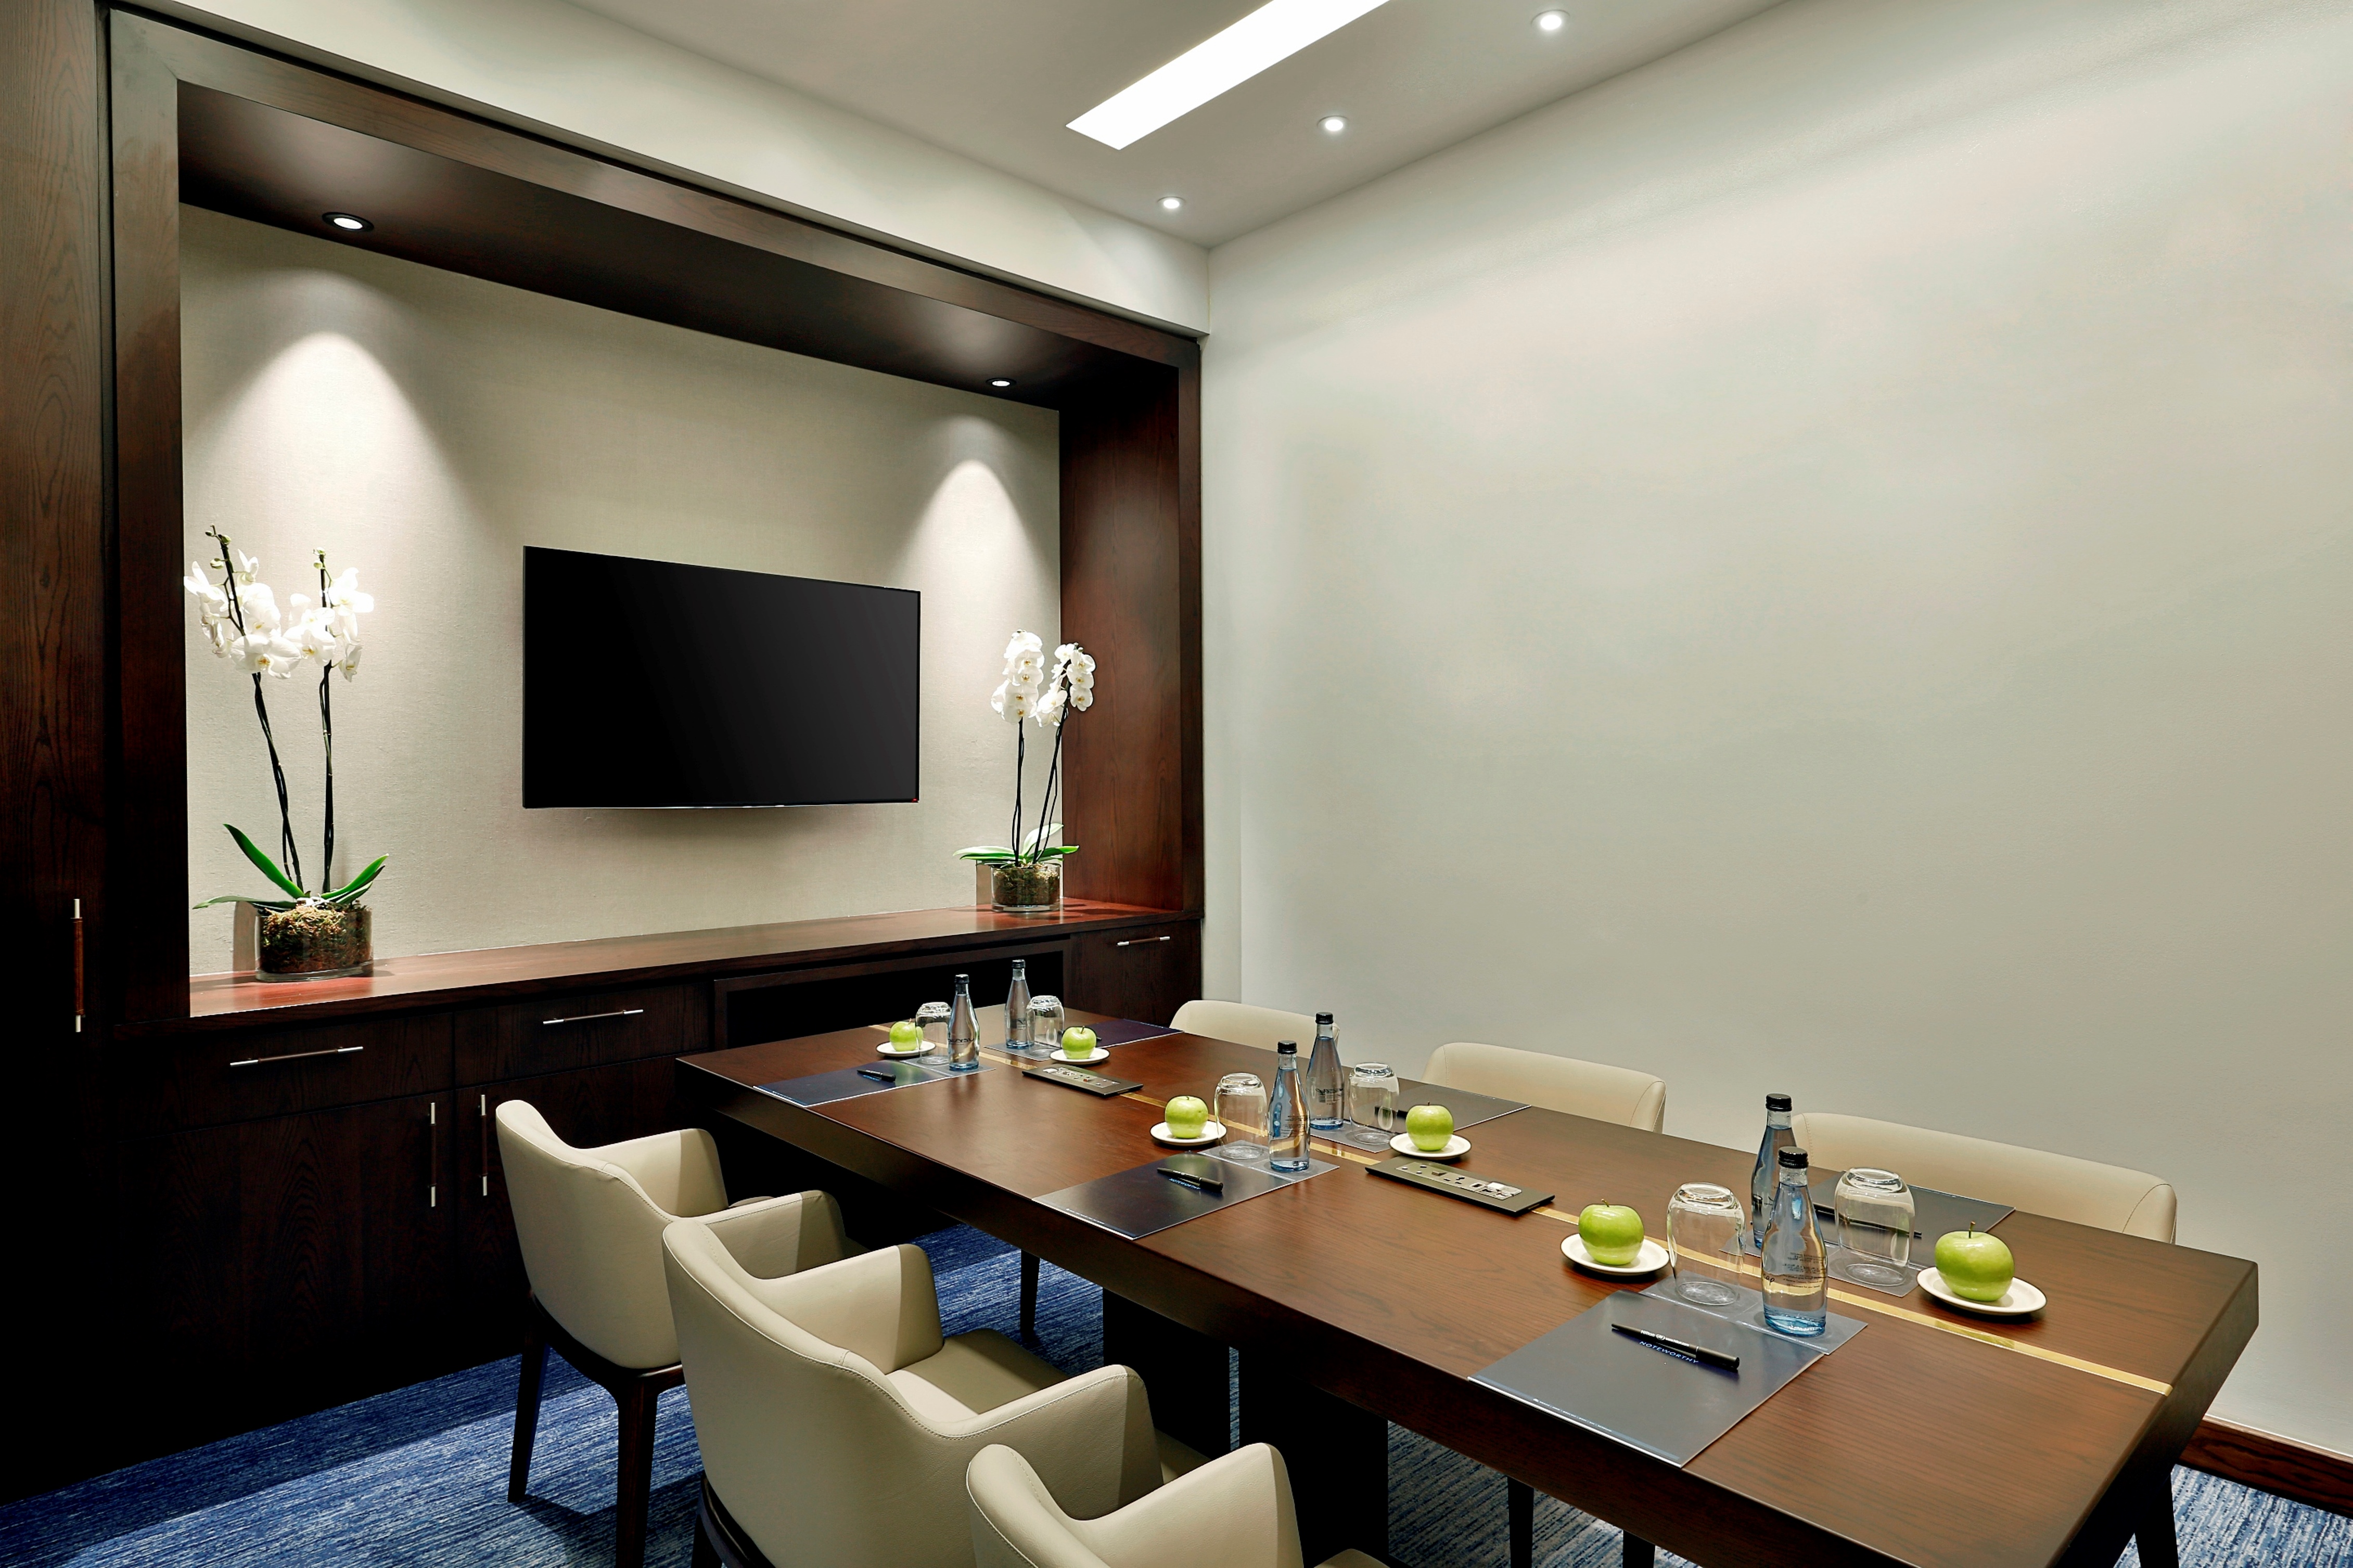 Meeting Room With Room Technology 